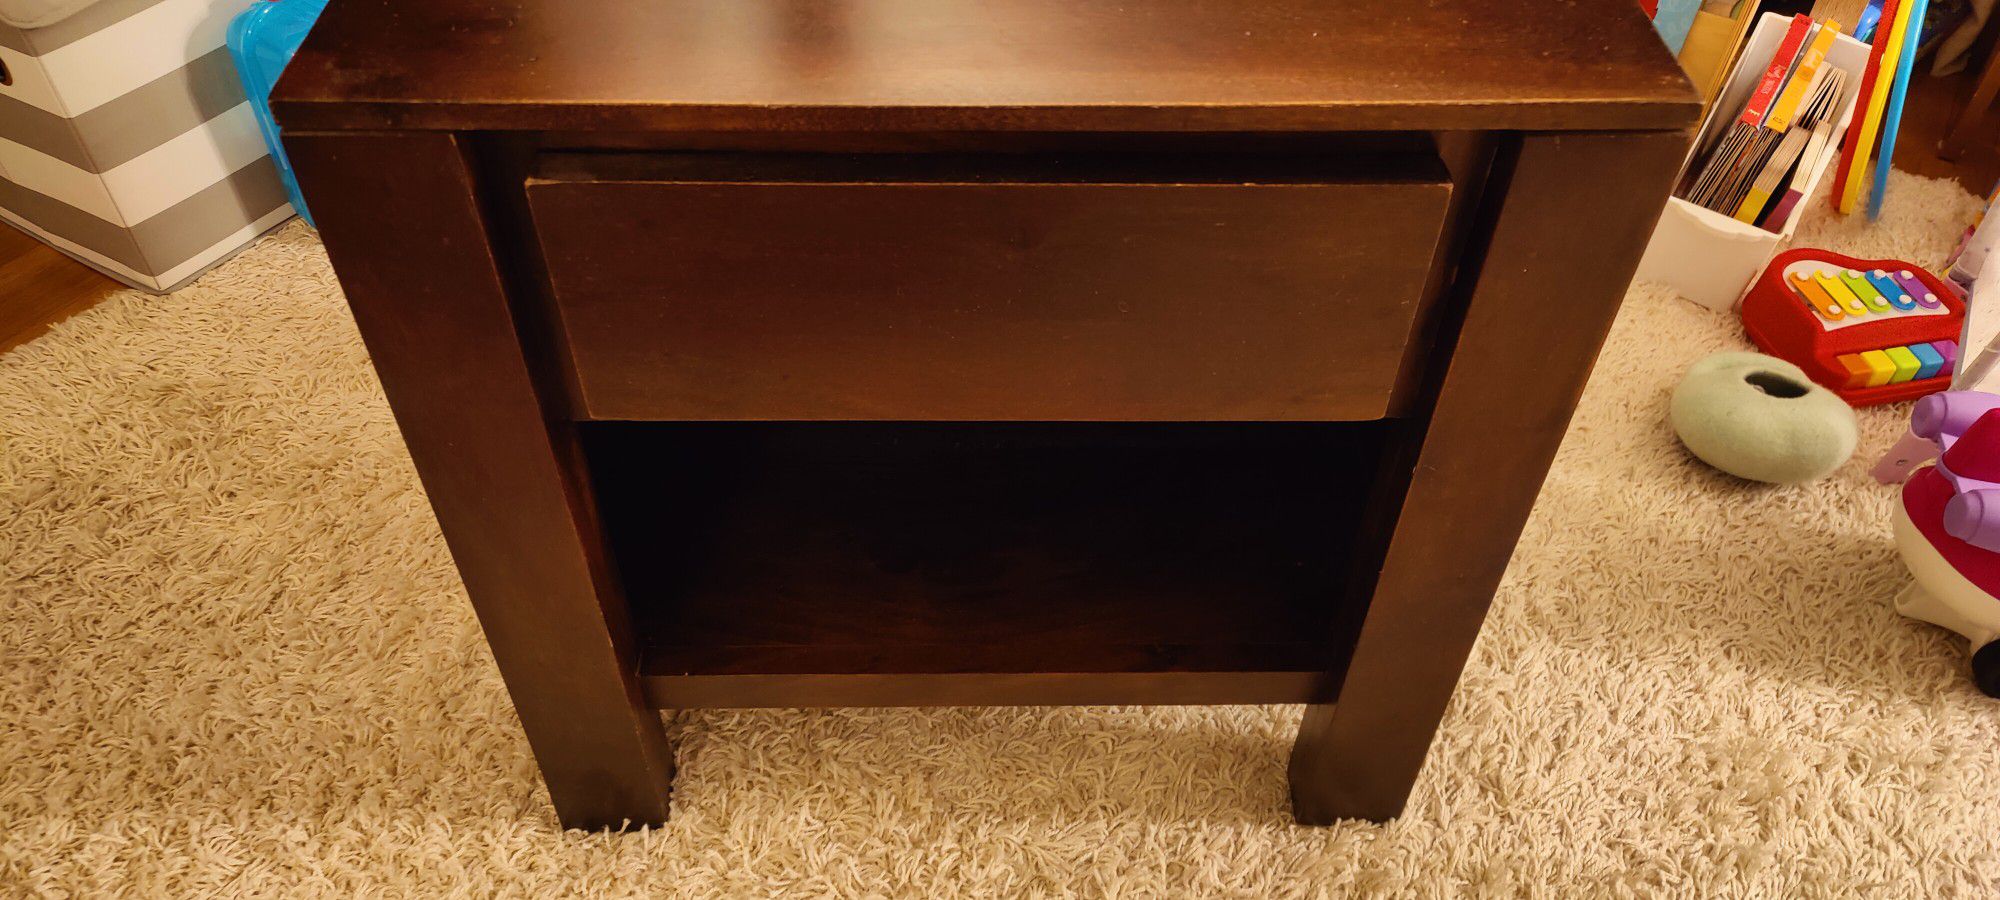 Heavy End Table